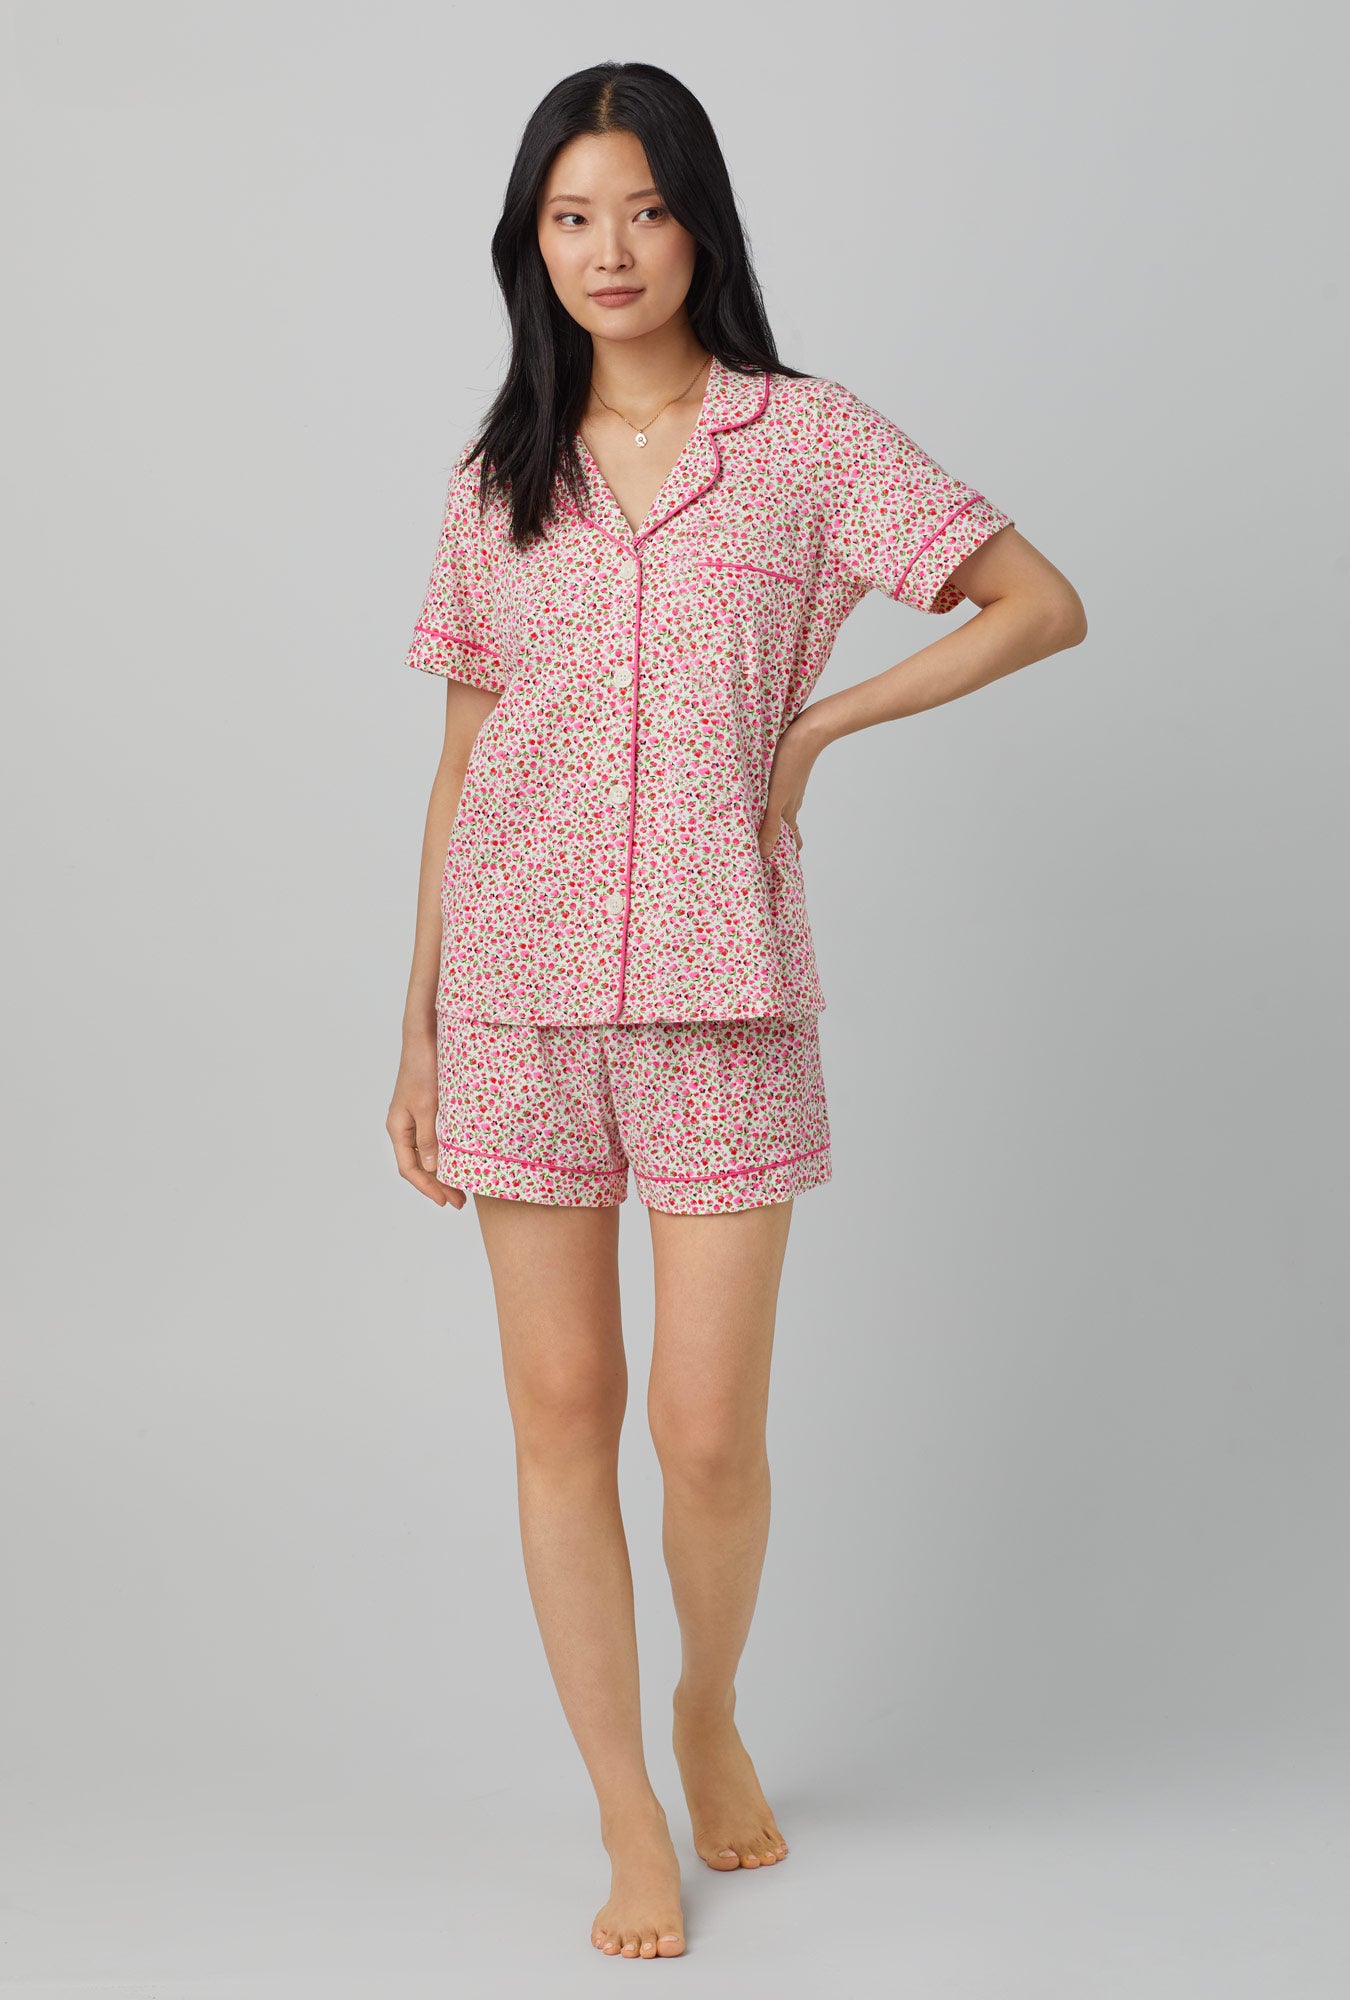 A lady wearing pink Short Sleeve Classic Short Set with Lynn print